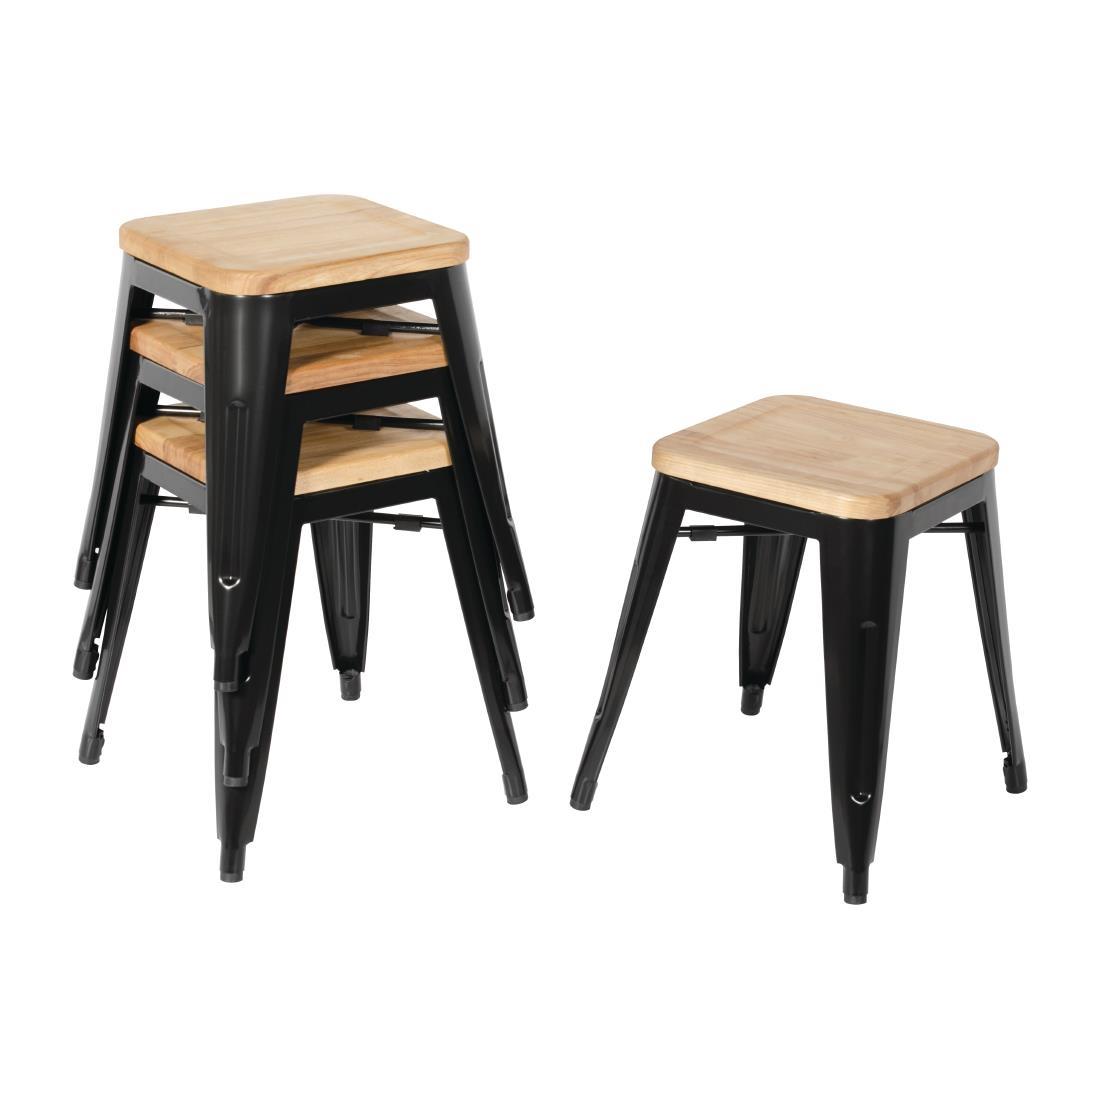 Bolero Bistro Low Stools with Wooden Seat Pad Black (Pack of 4) - GM635  - 5